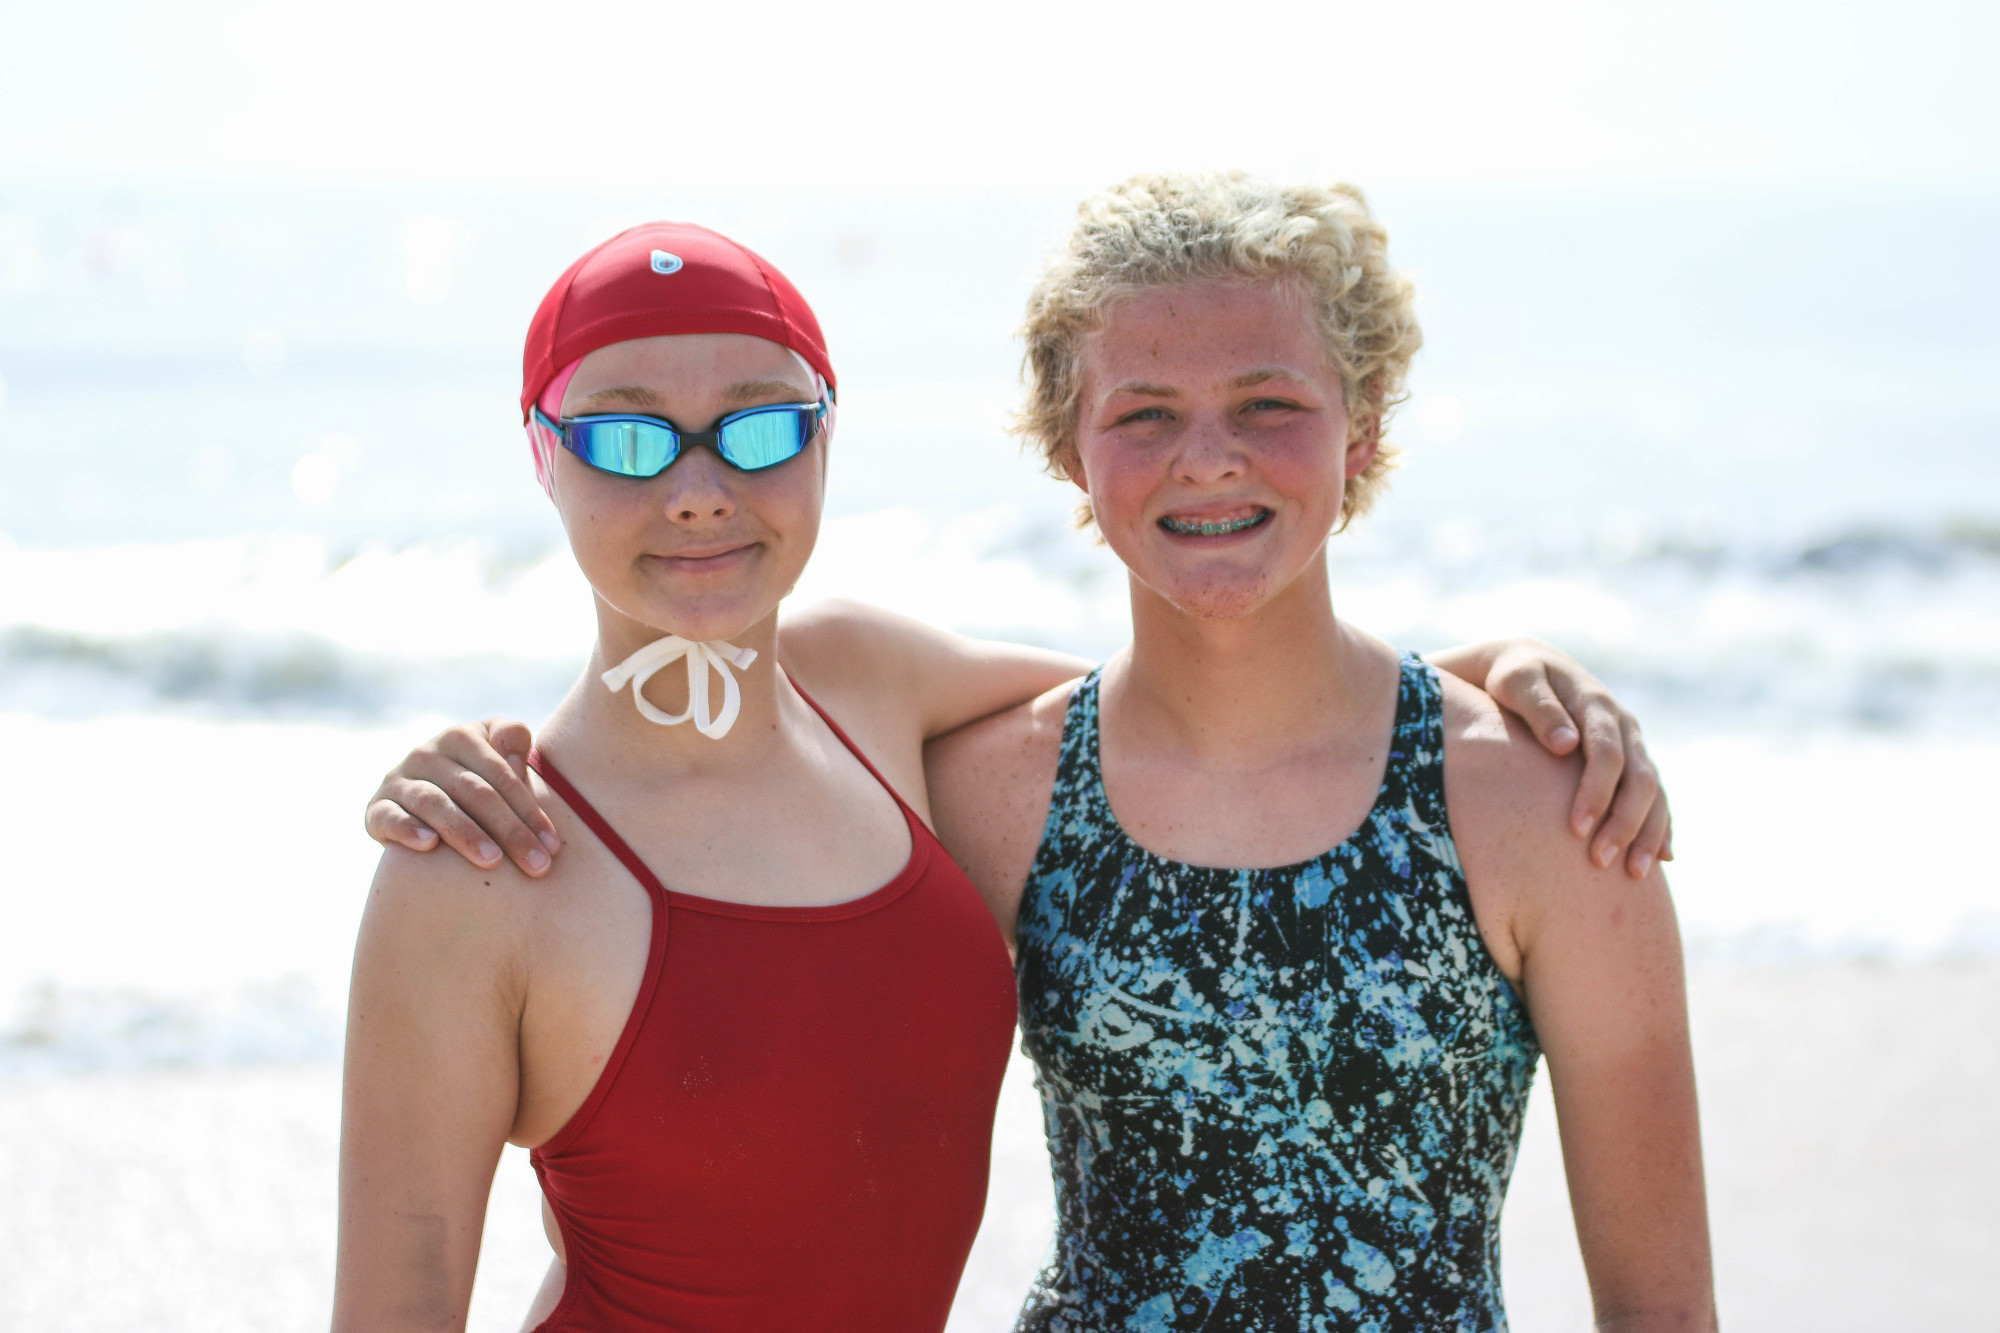 Mia Nilsen, 12, and Lucy Noble, 13, pose at the USLA Southeast Regional Championship, representing Flagler Beach lifeguards. Photo by Paige Wilson